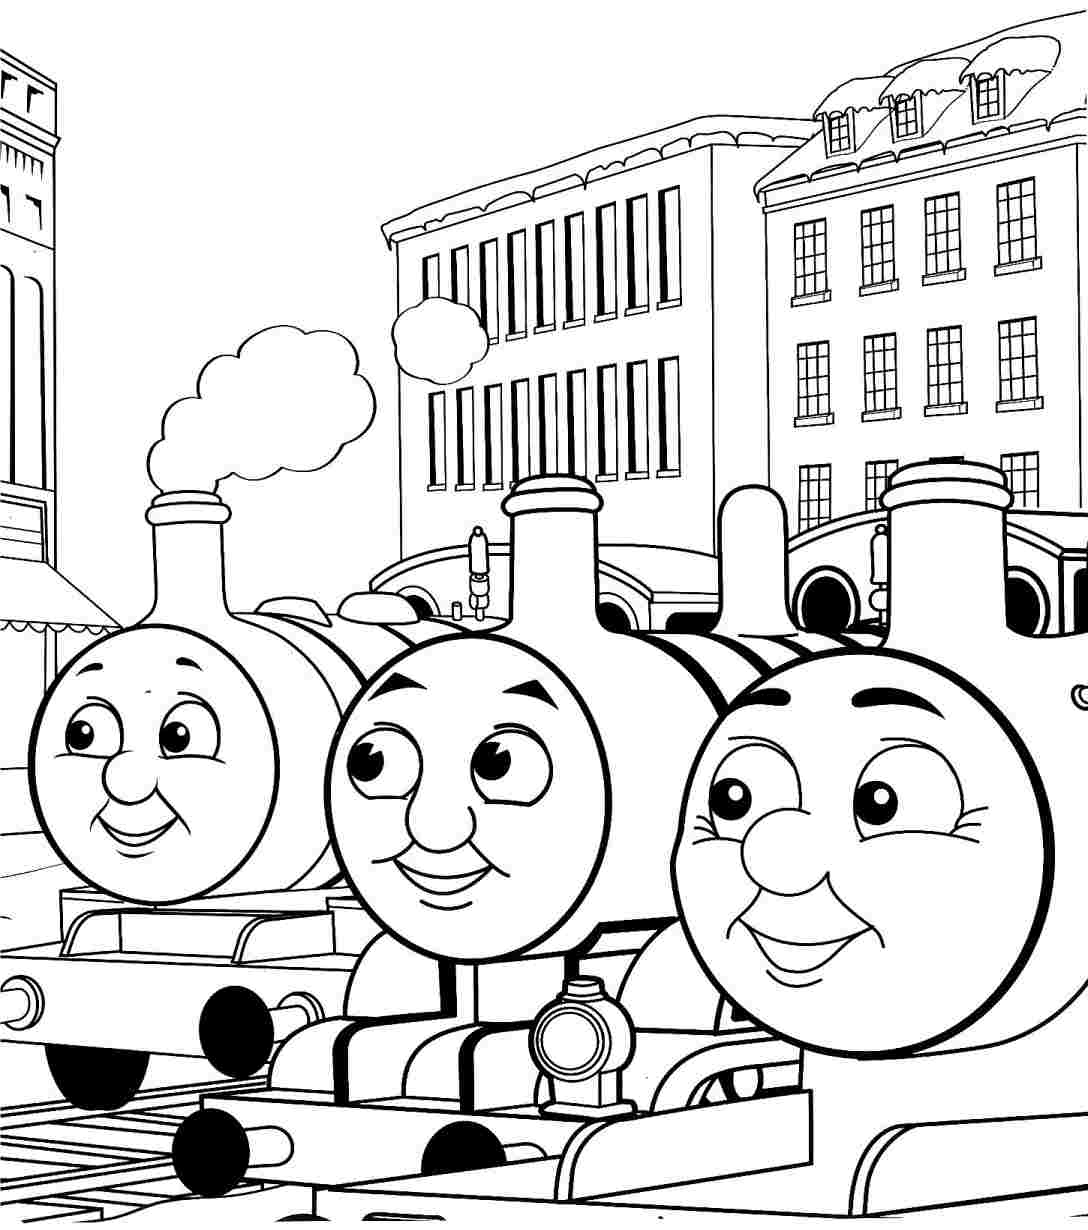 Thomas The Tank Engine Coloring Pages 15 Coloring Kids | Images and ...